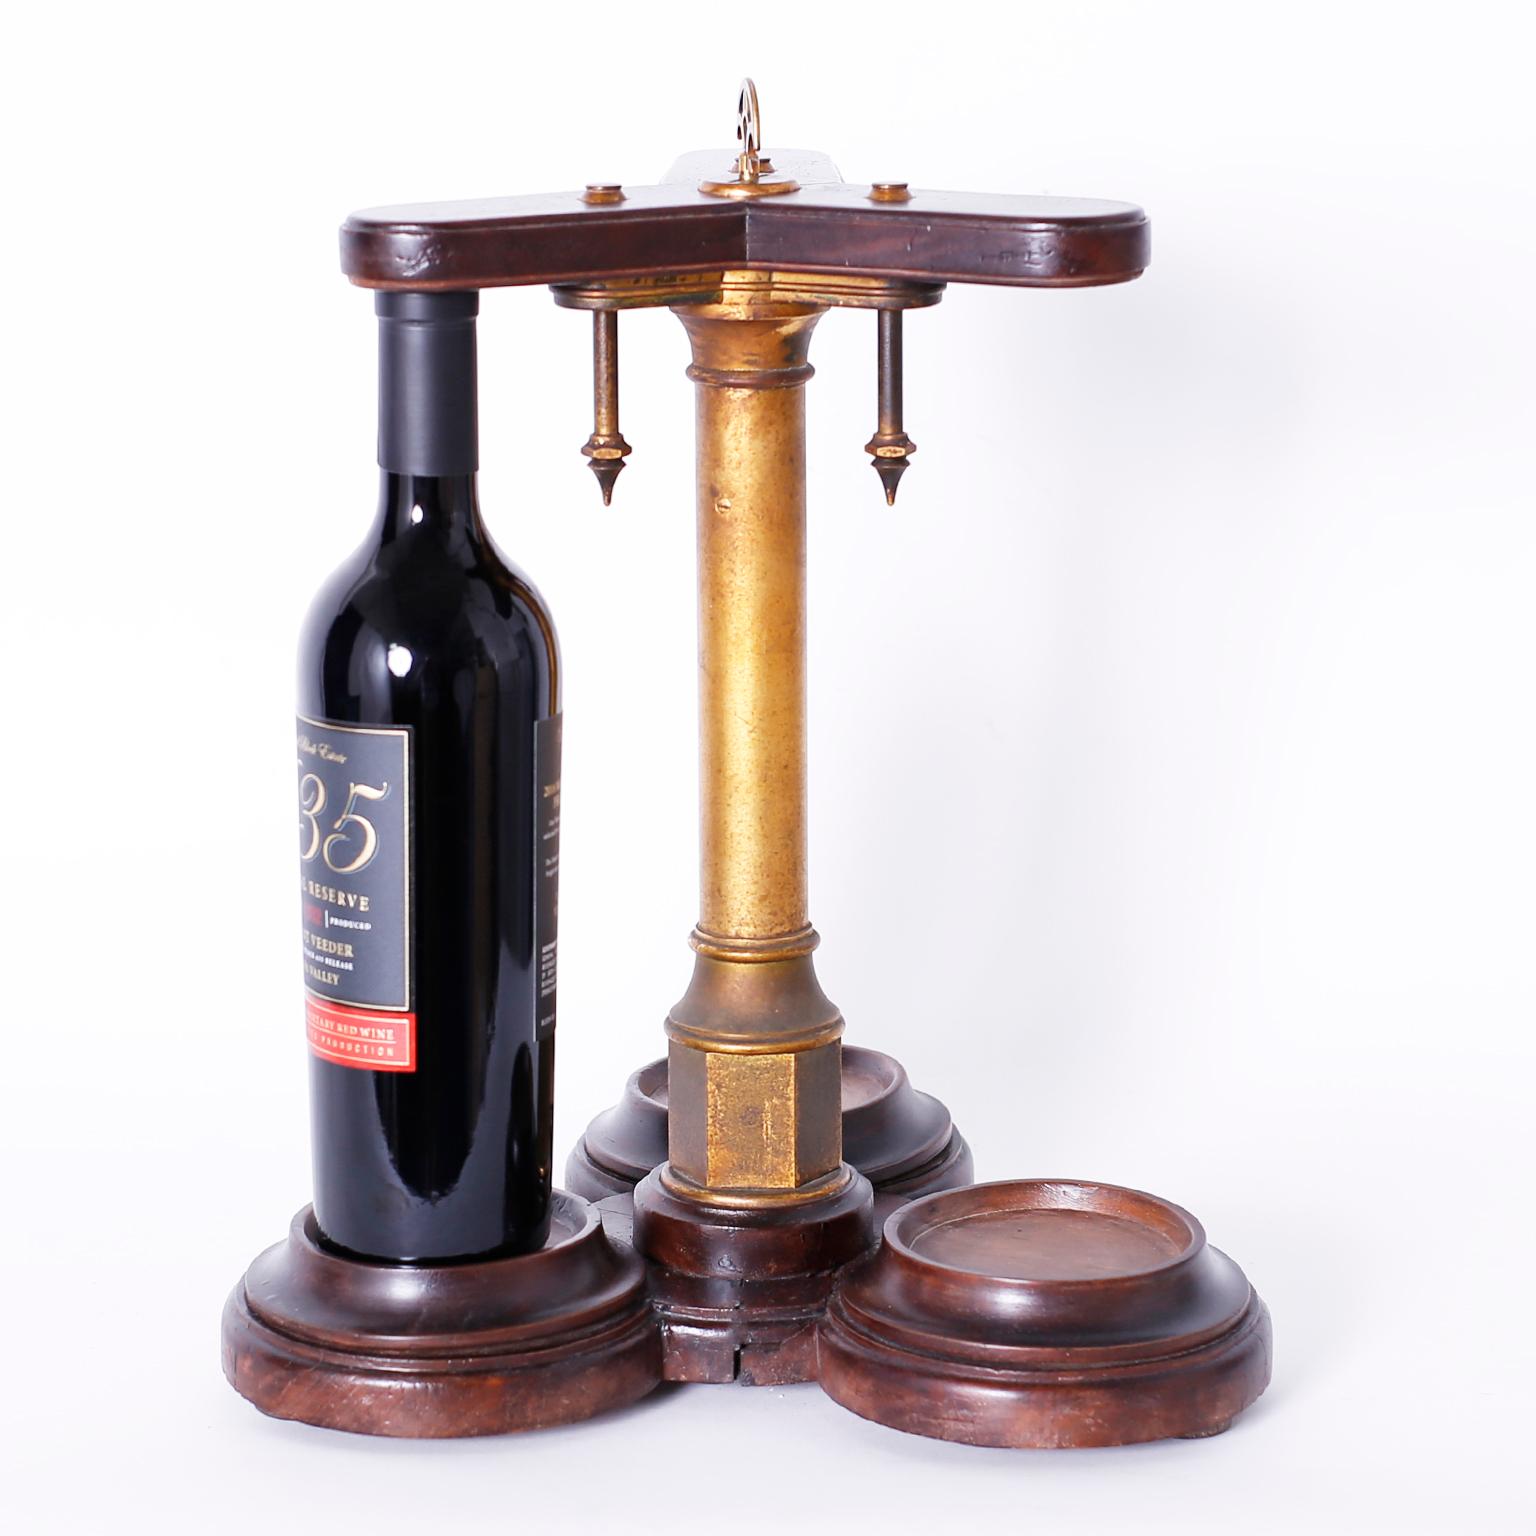 Antique English wine bottle rack crafted in mahogany and brass with an ingenious locking mechanism that moves with the turn of the key. Works with a 12.25